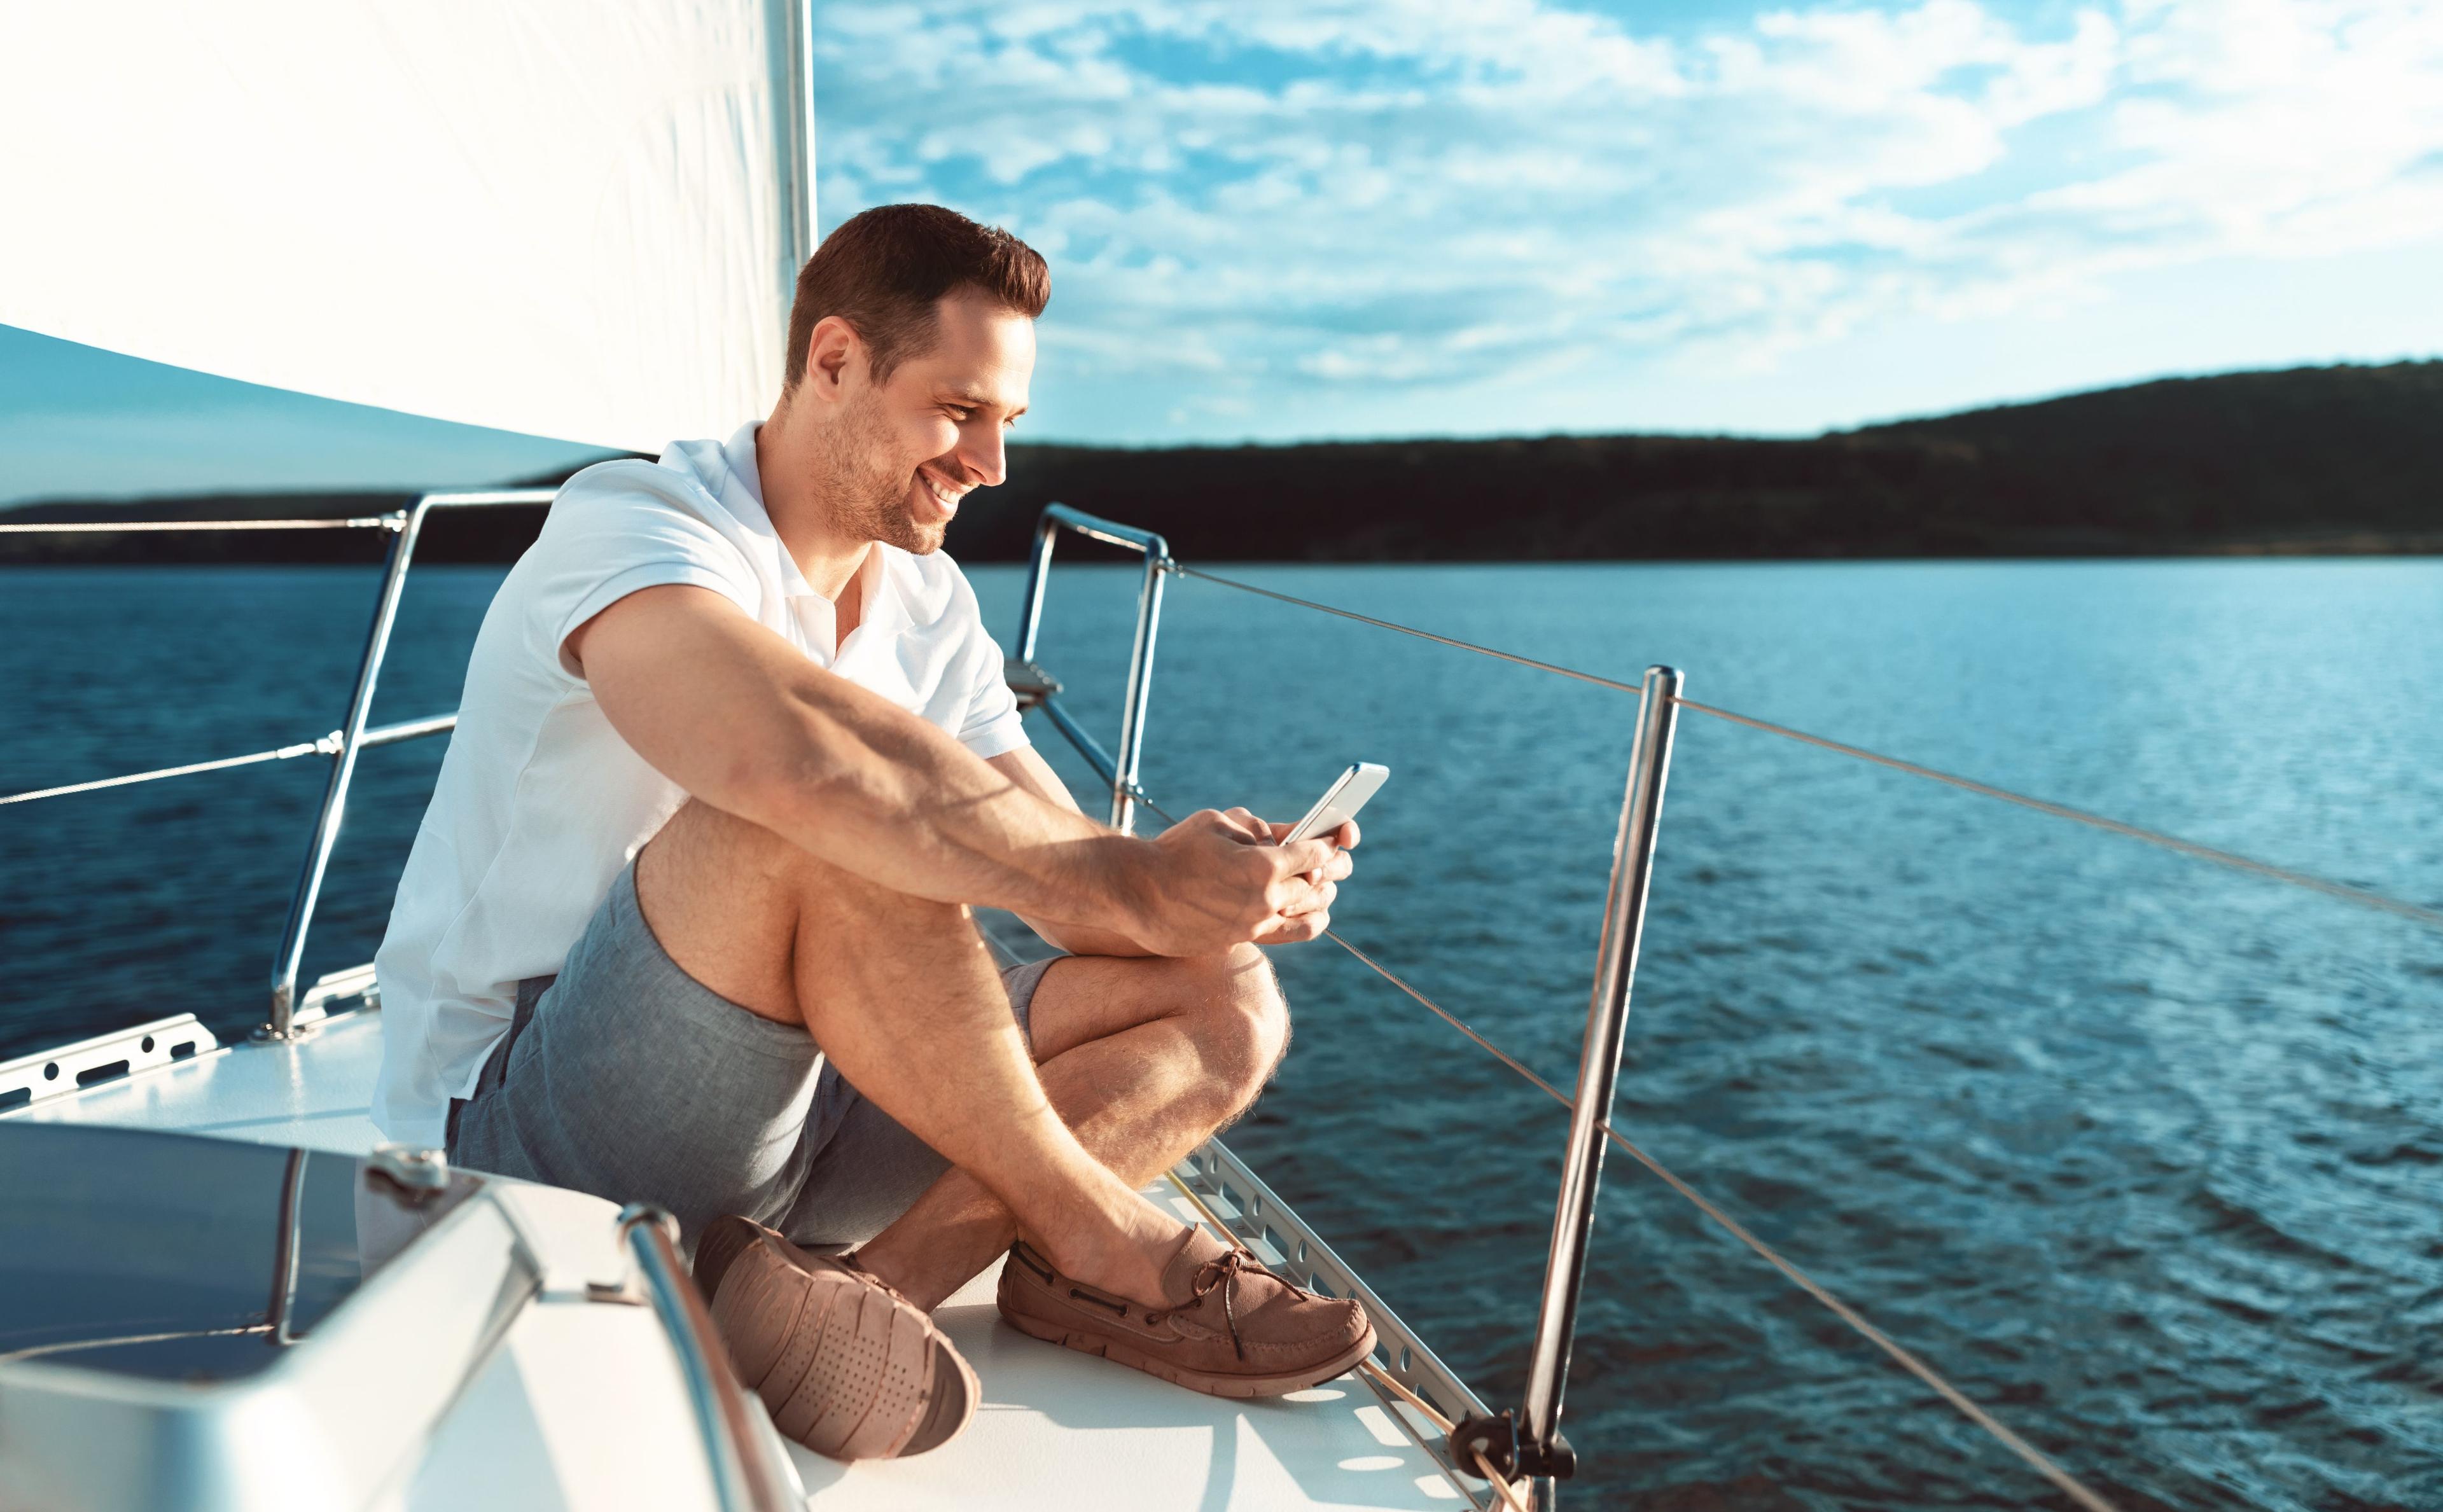 How to manage your boat tasks more efficiently using TheBoatApp